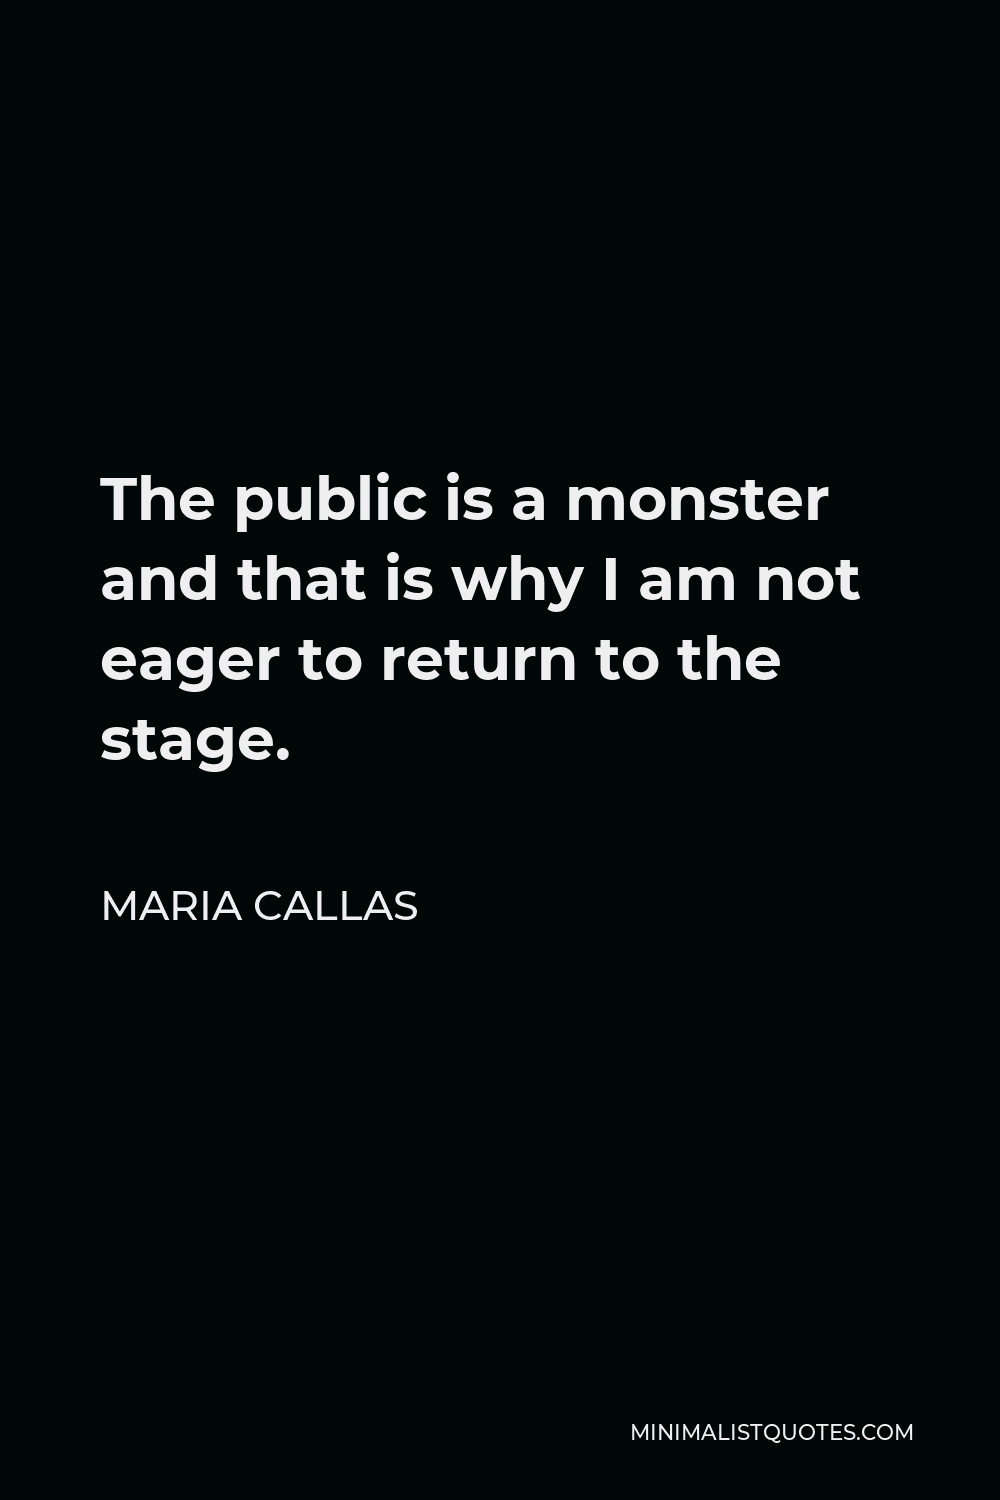 Maria Callas Quote - The public is a monster and that is why I am not eager to return to the stage.